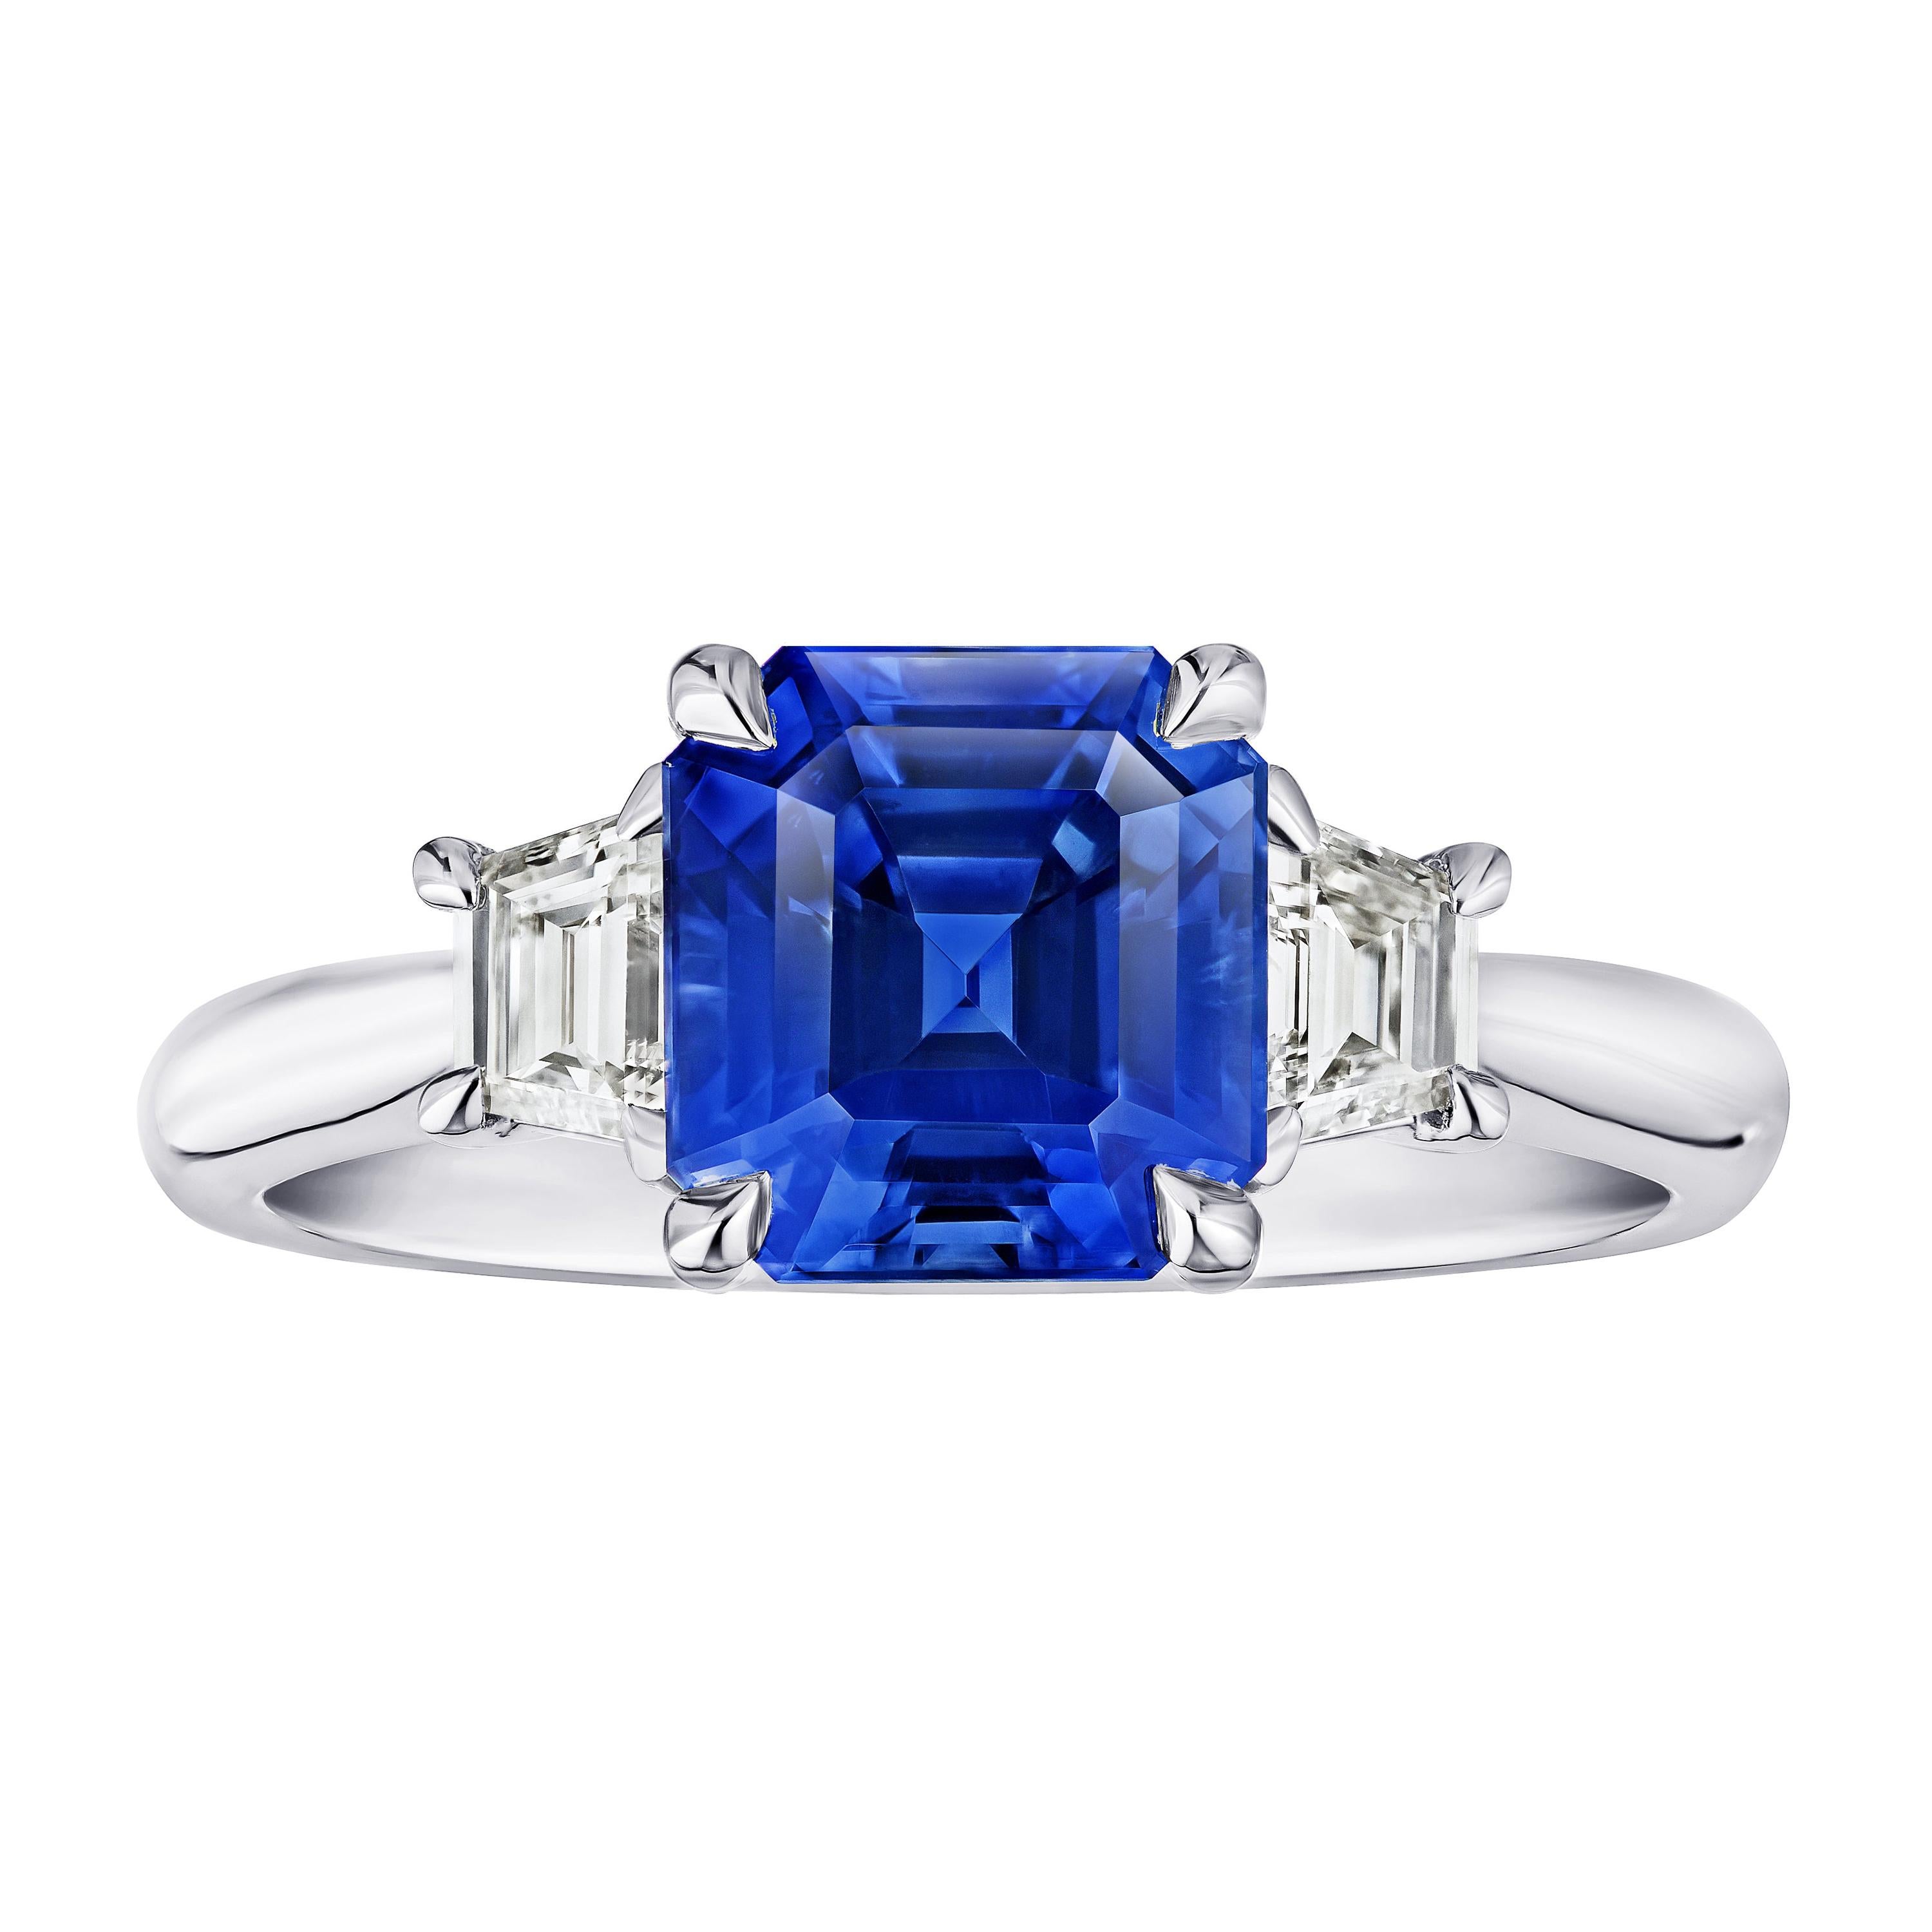 3.18 Carat Emerald Cut Blue Sapphire and Diamond Ring For Sale